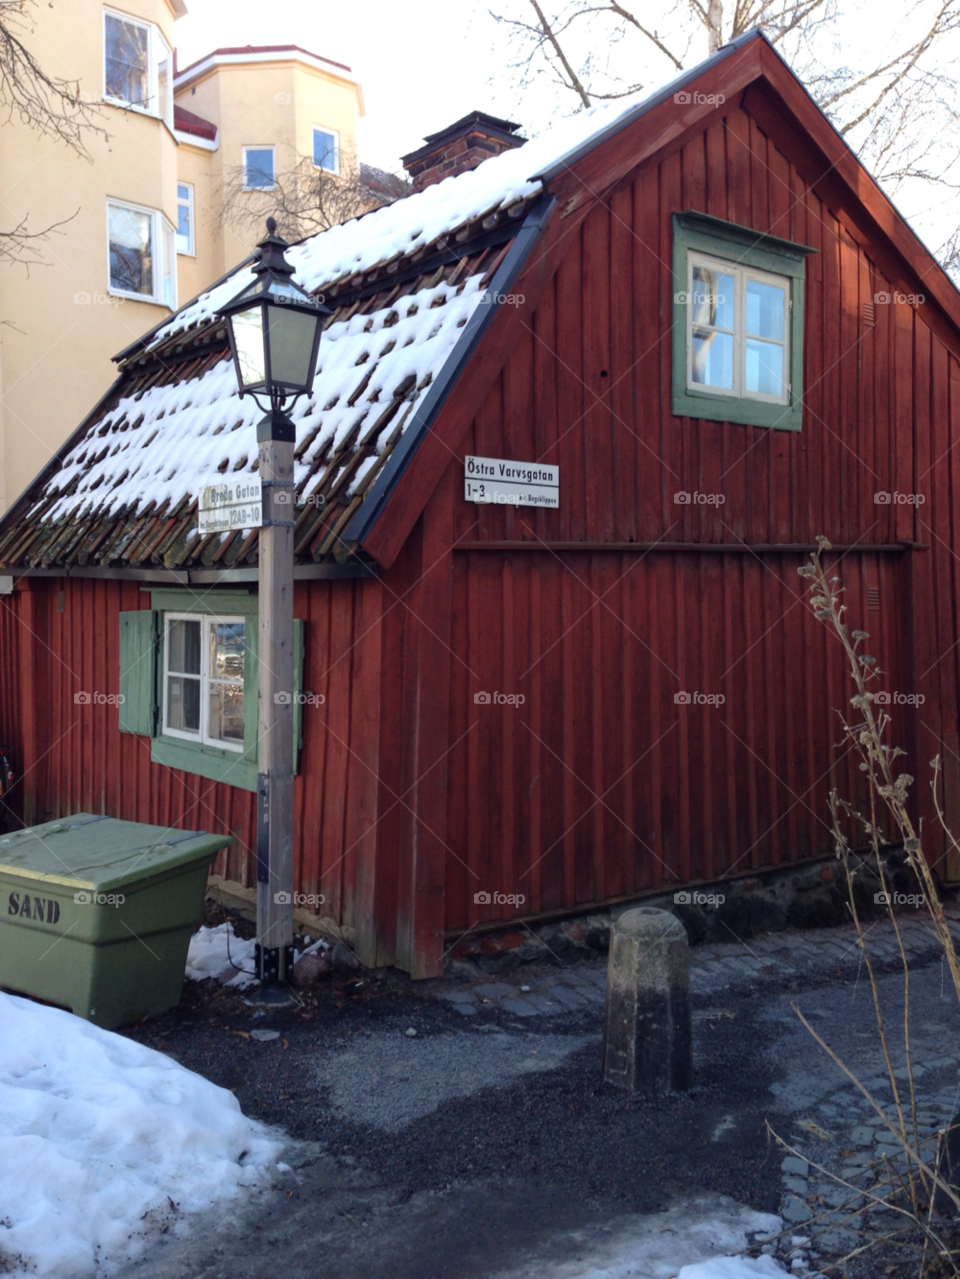 stockholm old cabin wooden house by Barbman